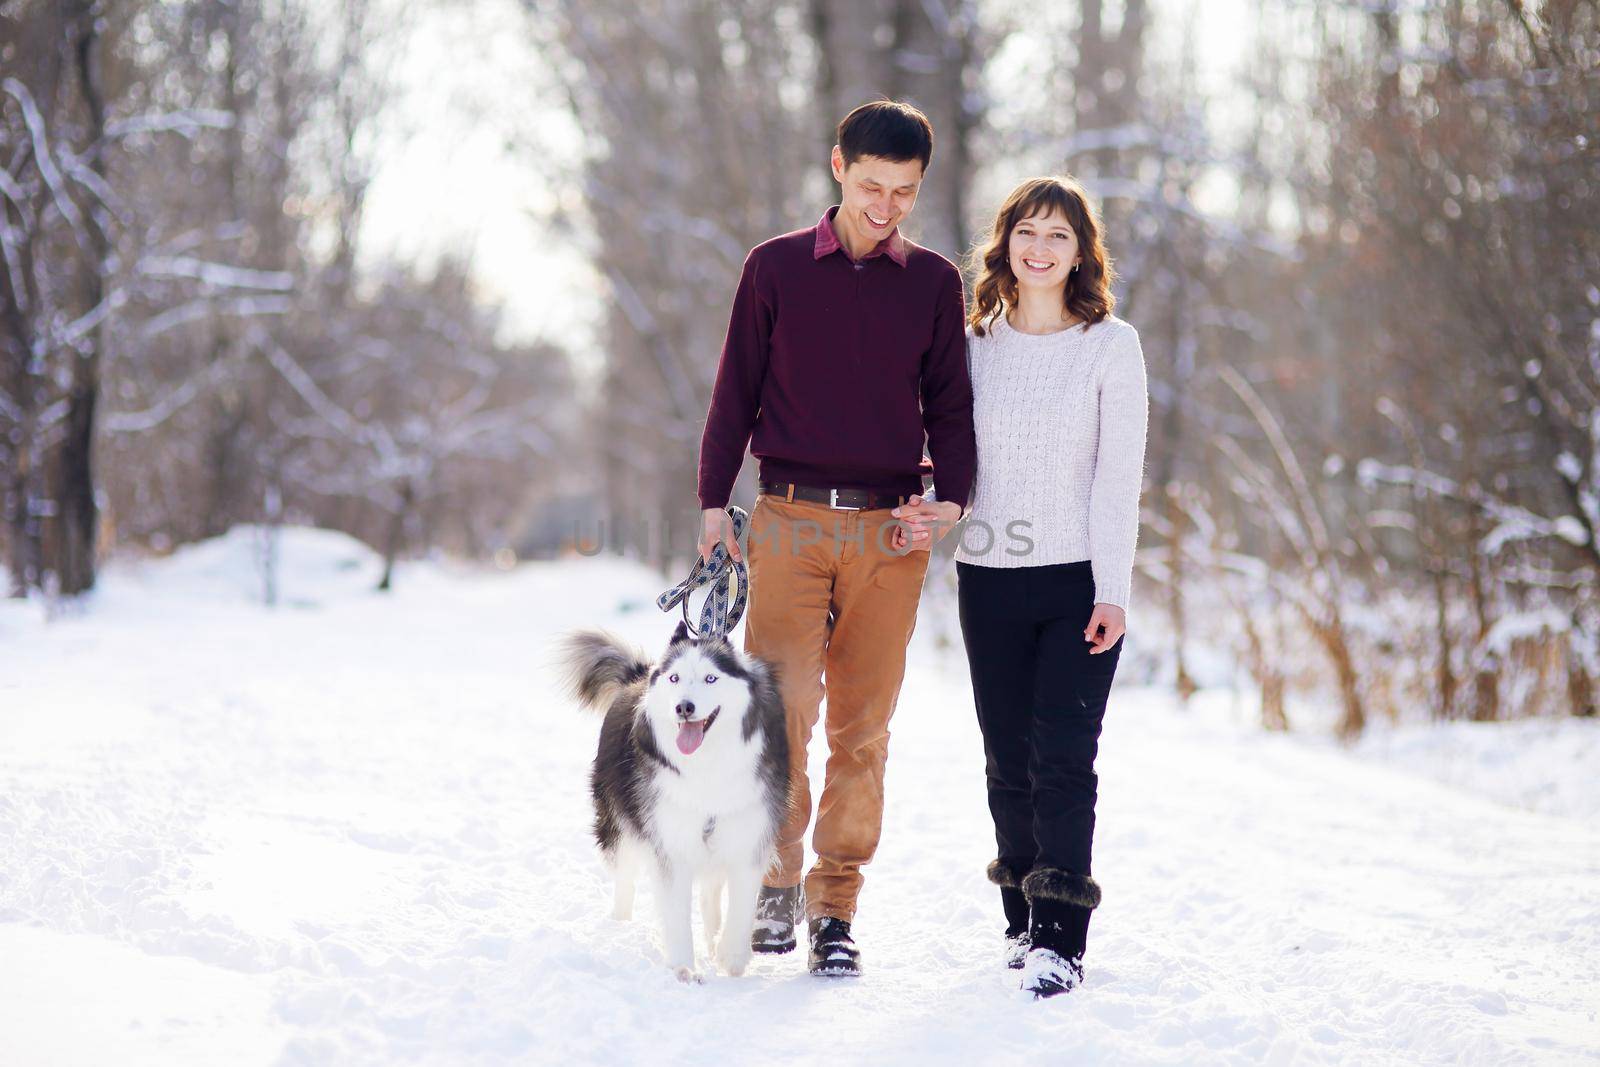 Young couple smiling and having fun in winter park with their husky dog.